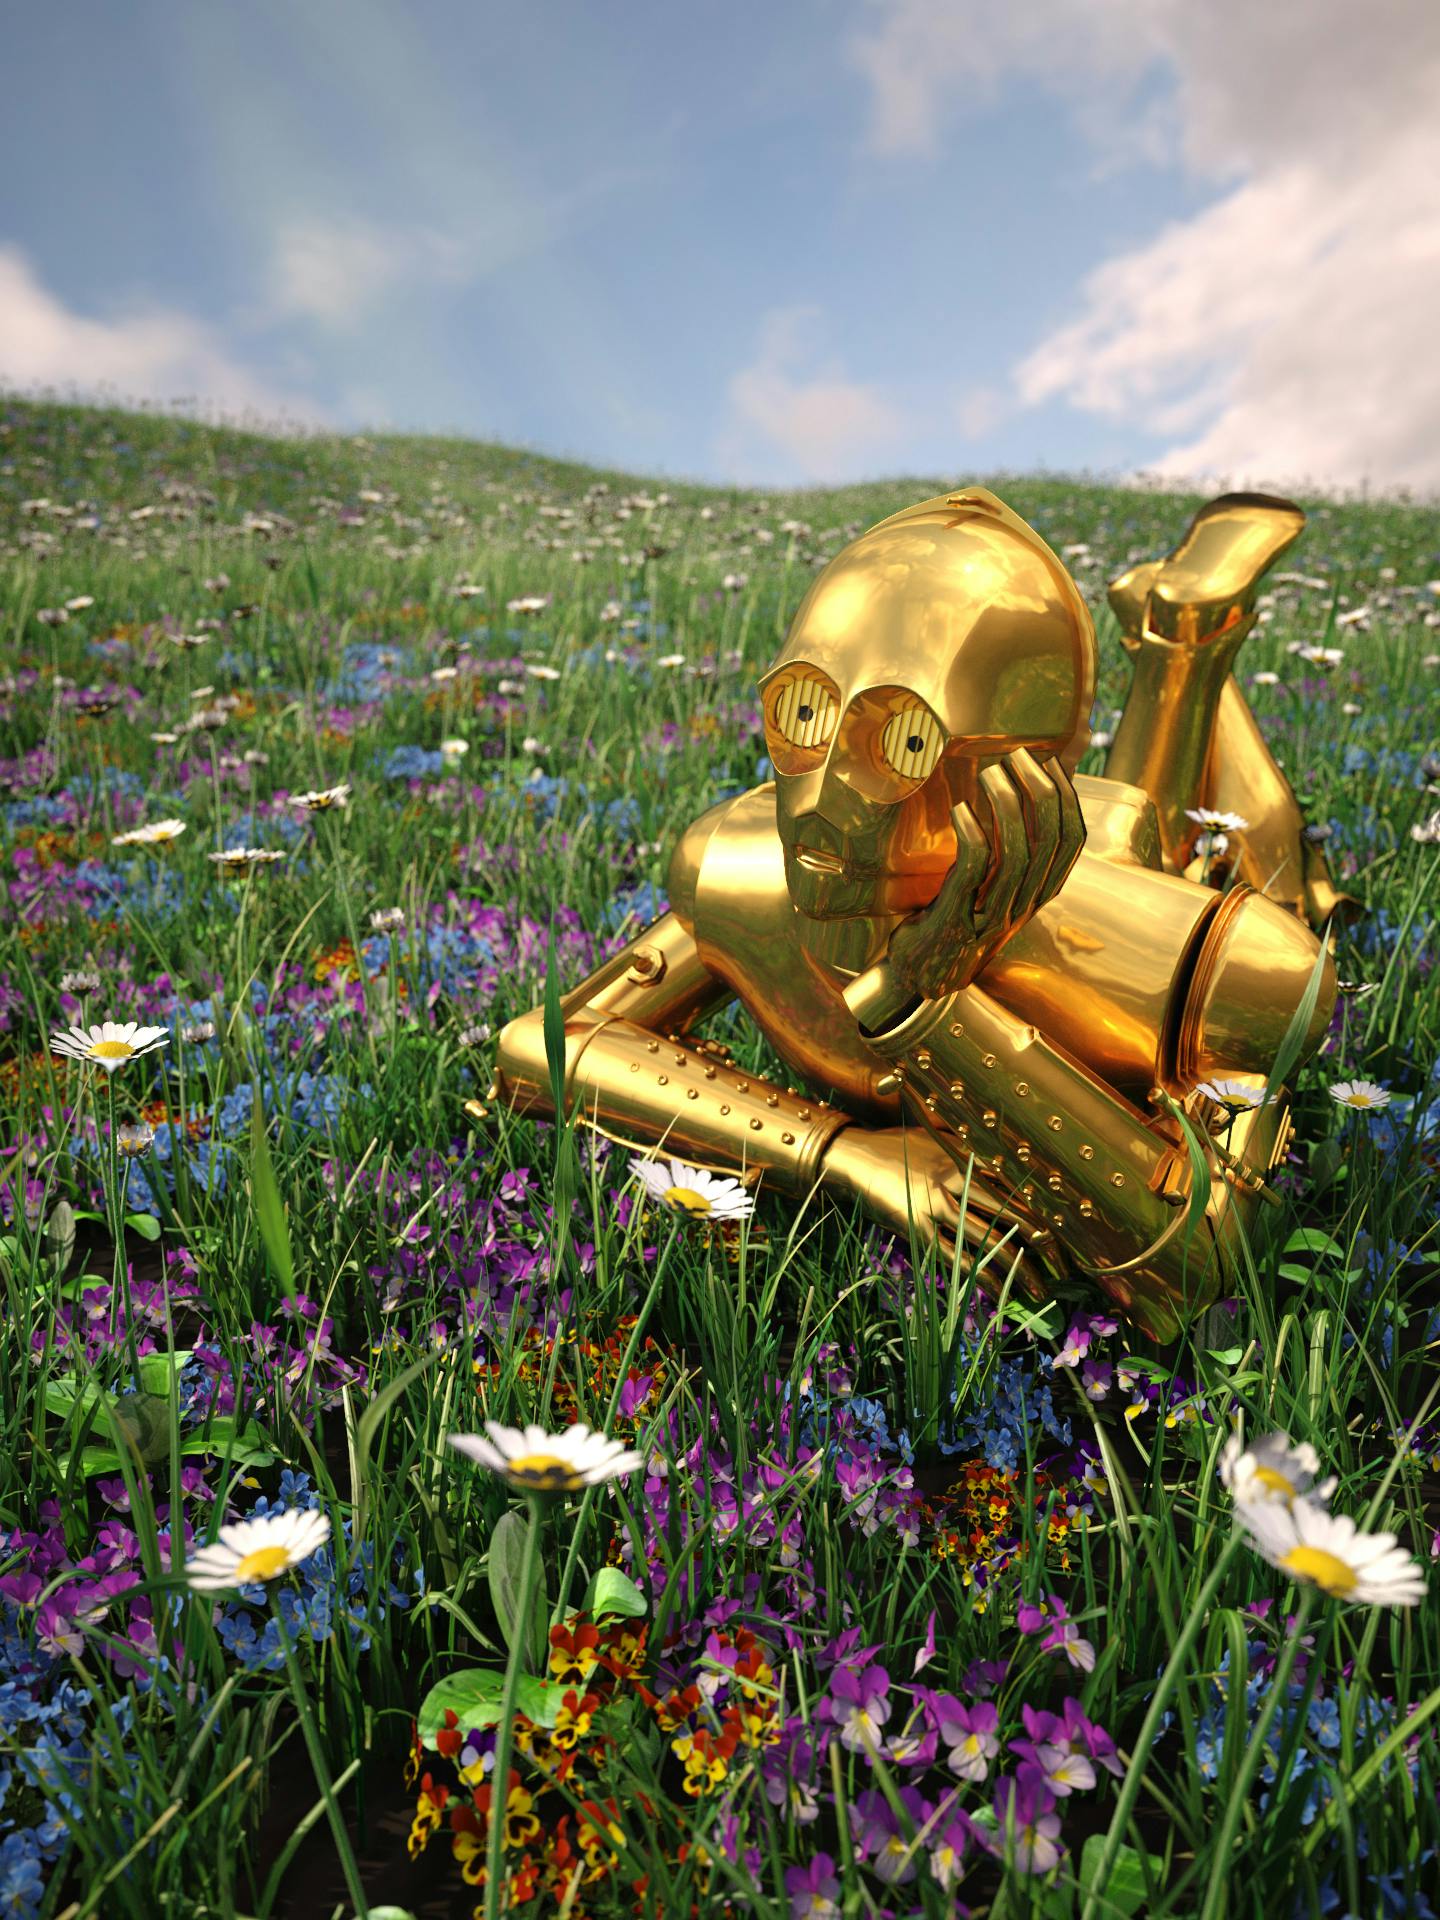 C3PO just wants adventure in the great, wide, somewhere.